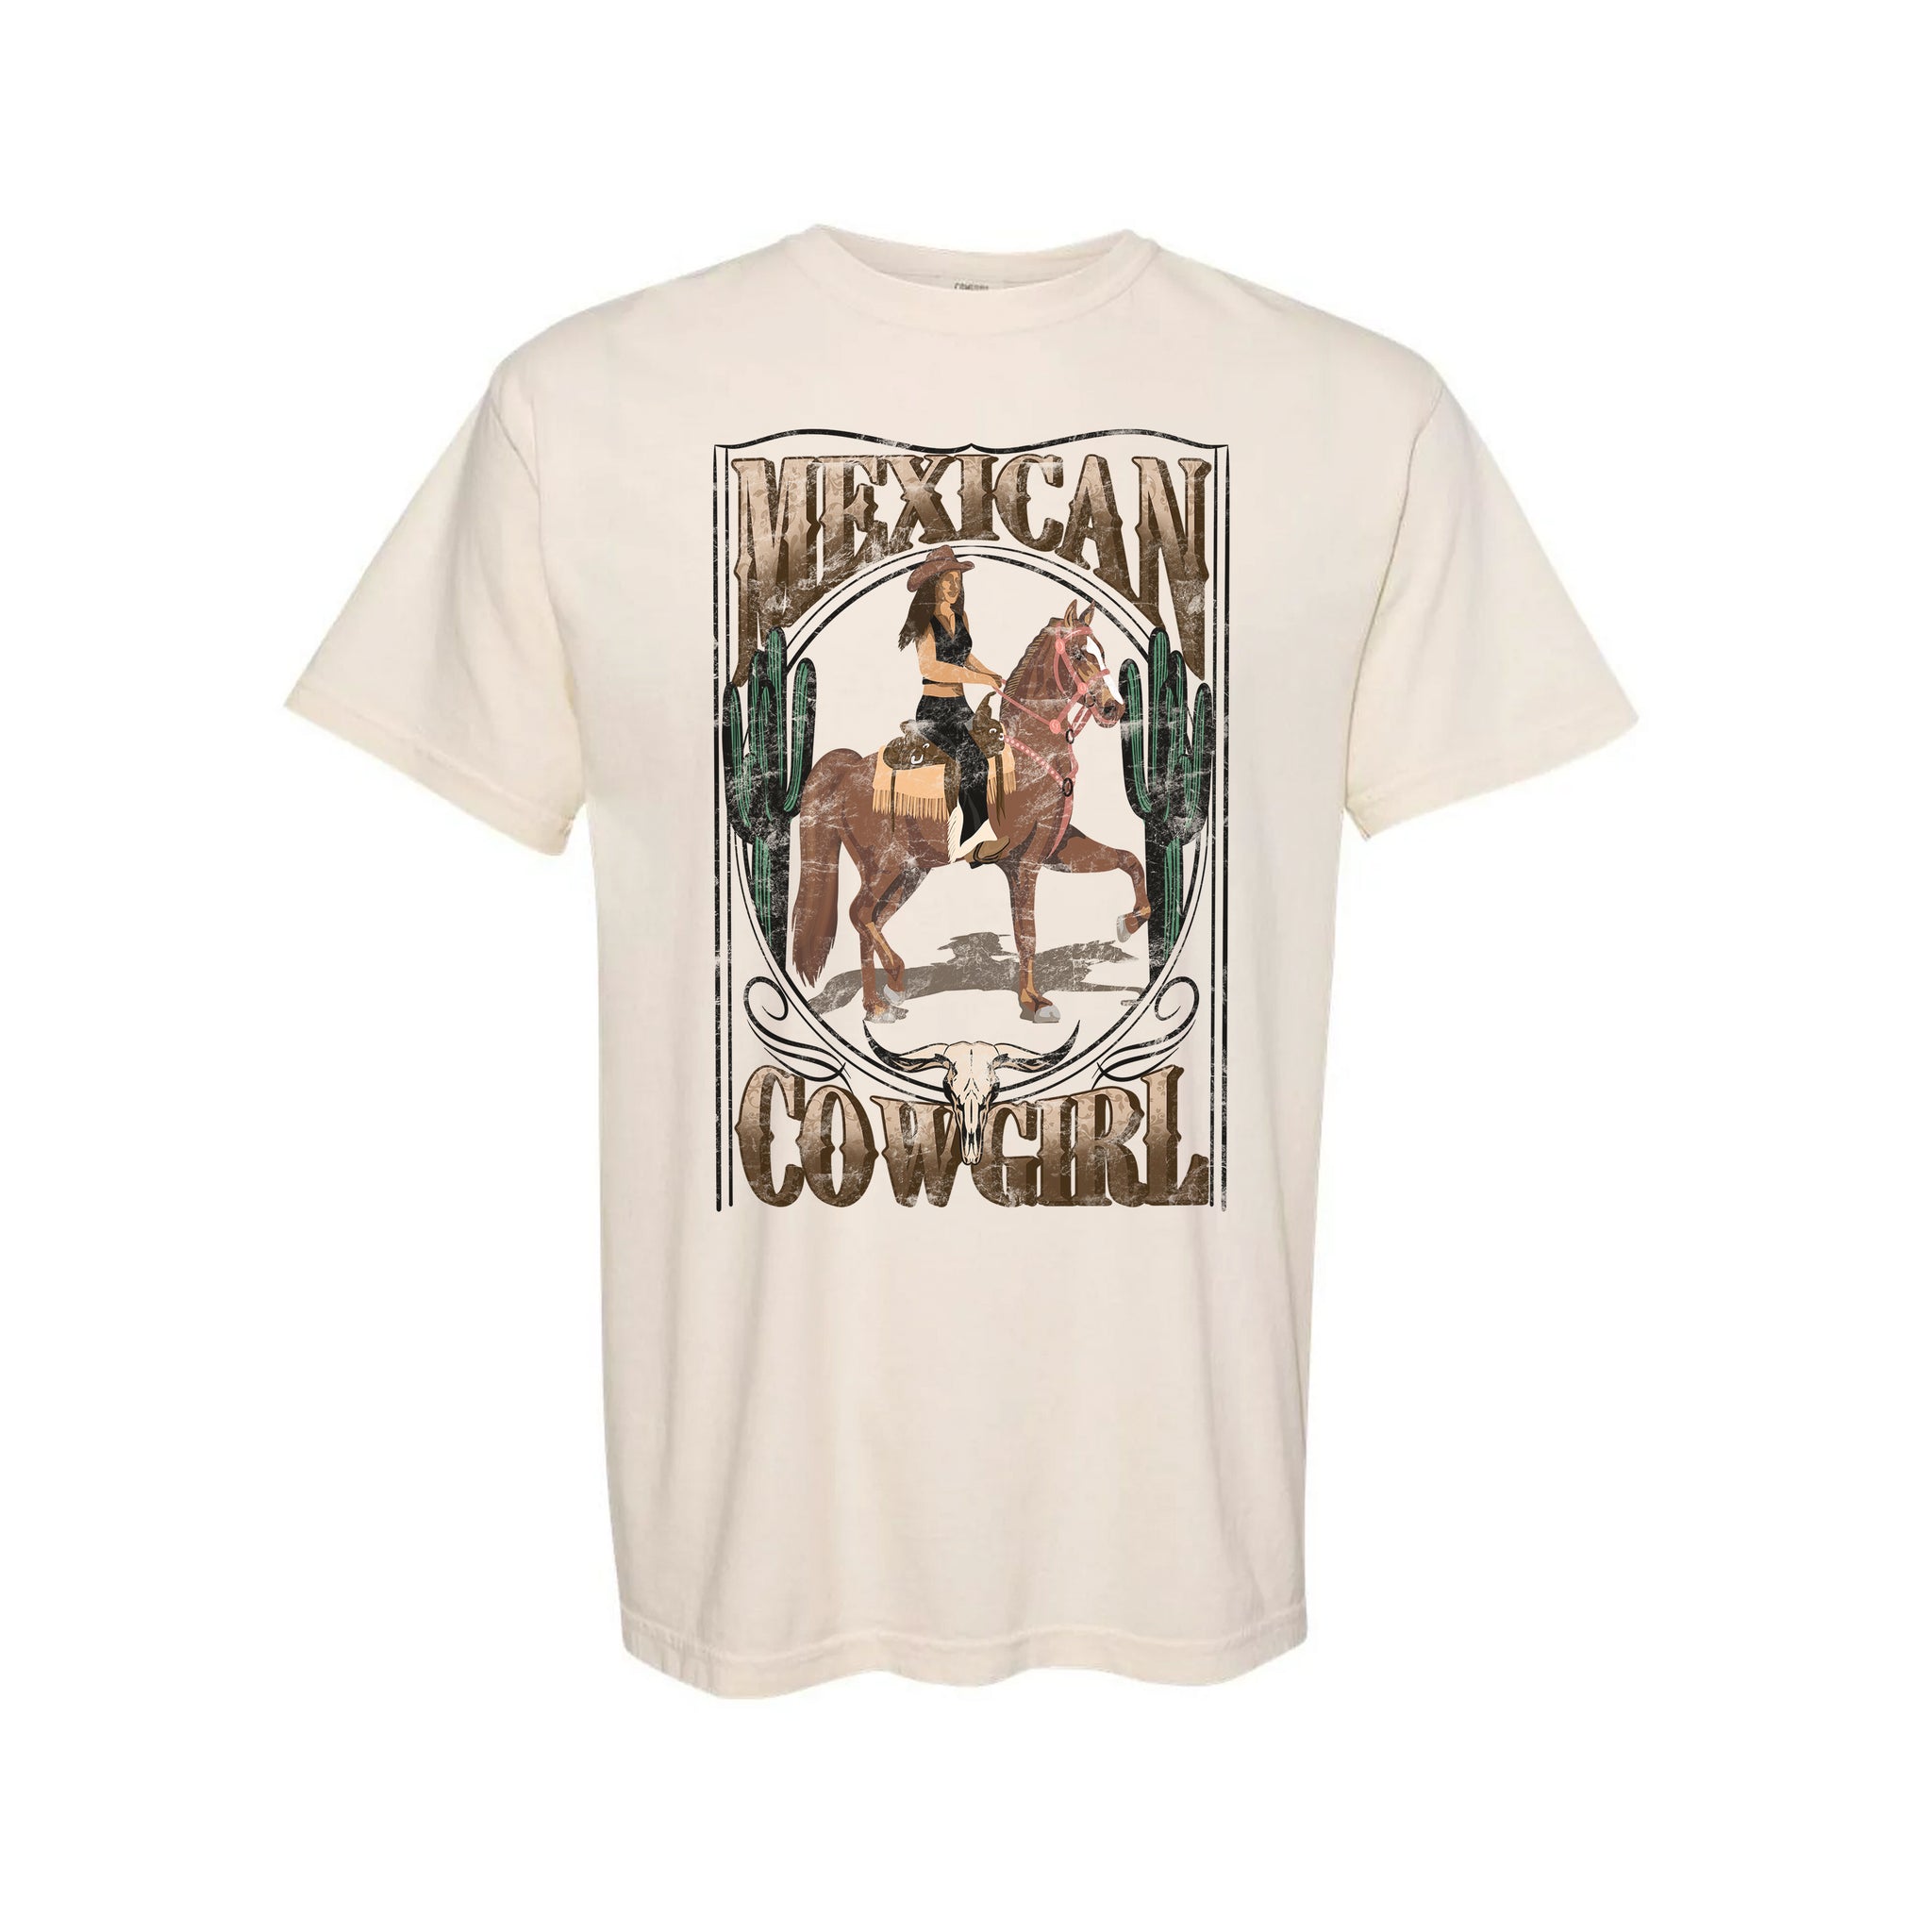 MEXICAN COWGIRL T-SHIRT